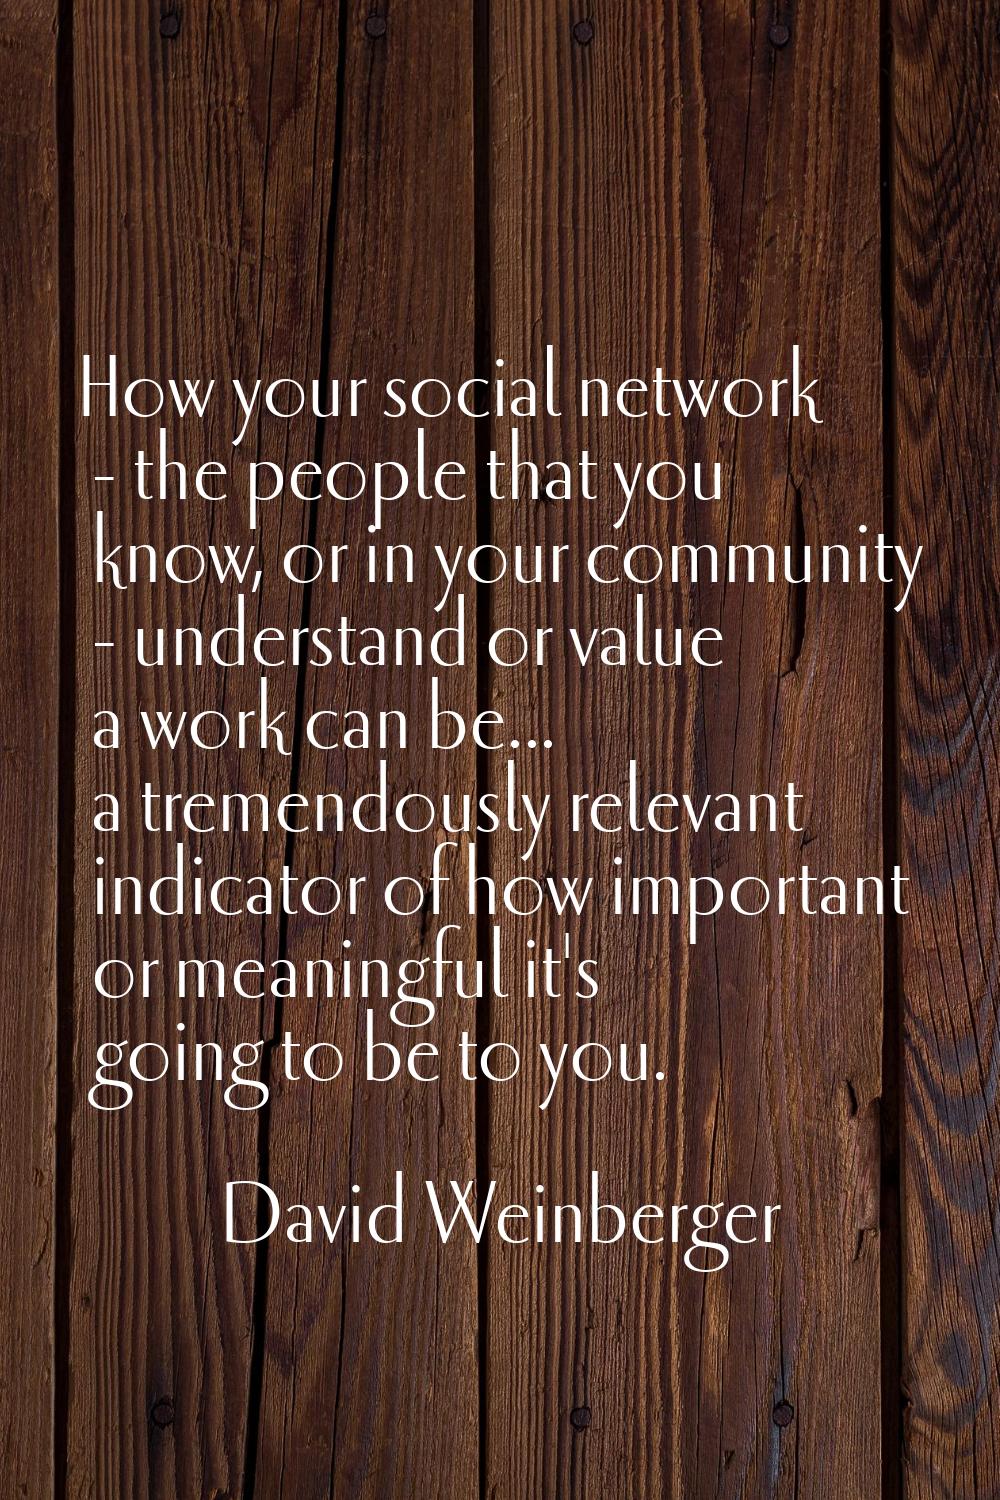 How your social network - the people that you know, or in your community - understand or value a wo